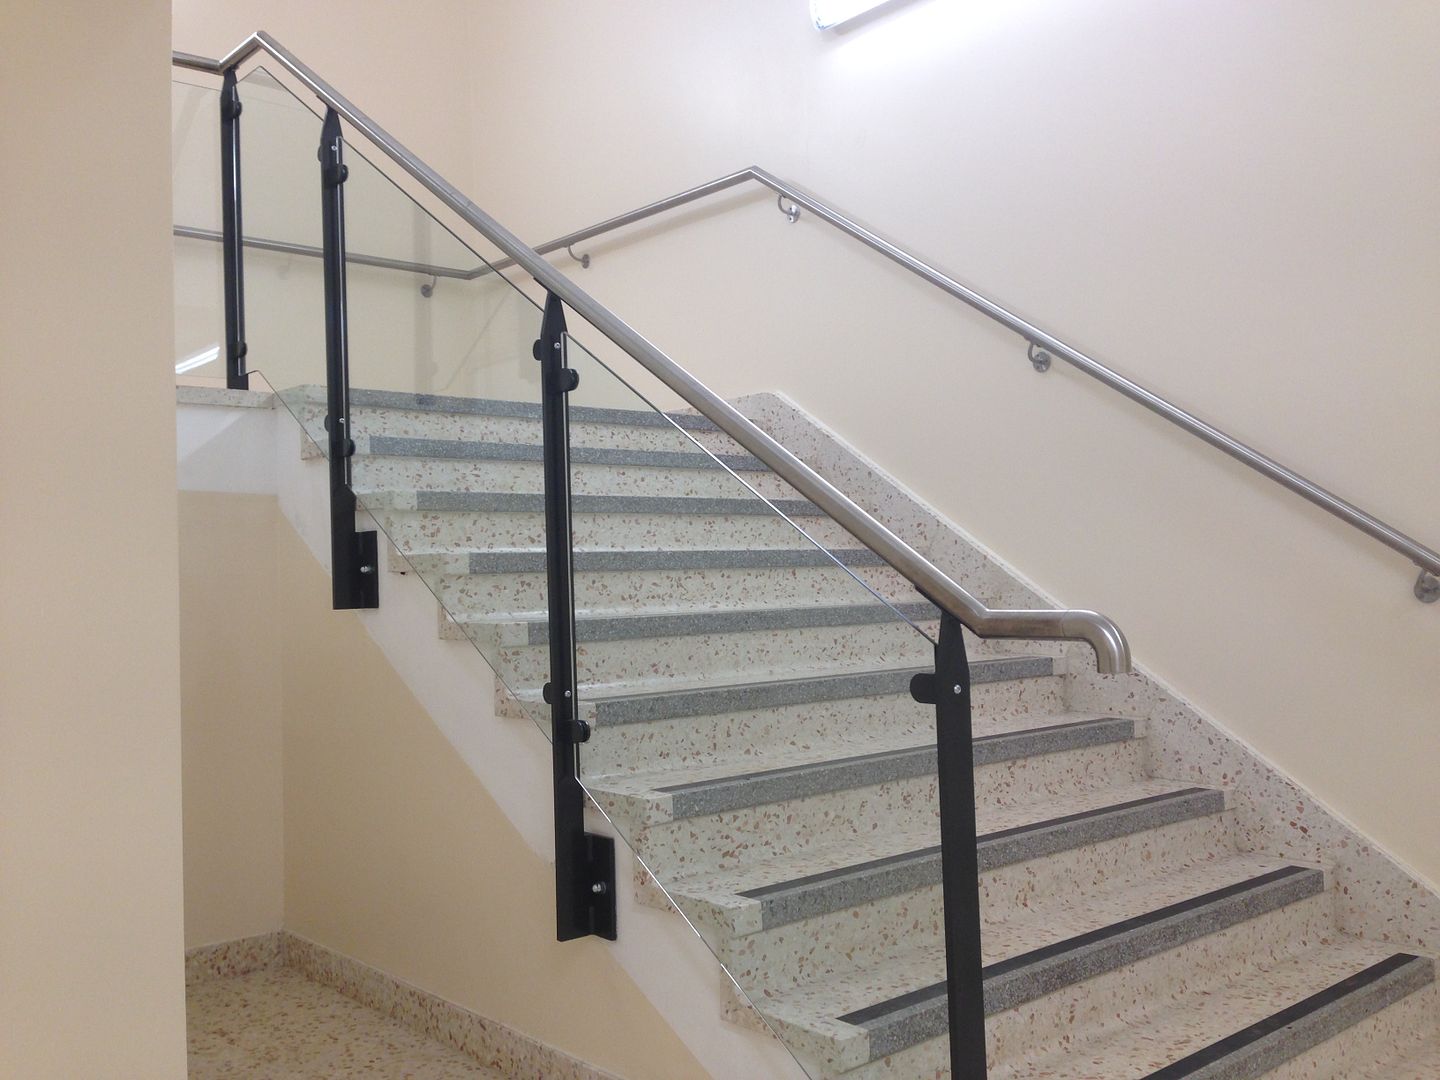 Example commercial balustrade and handrails